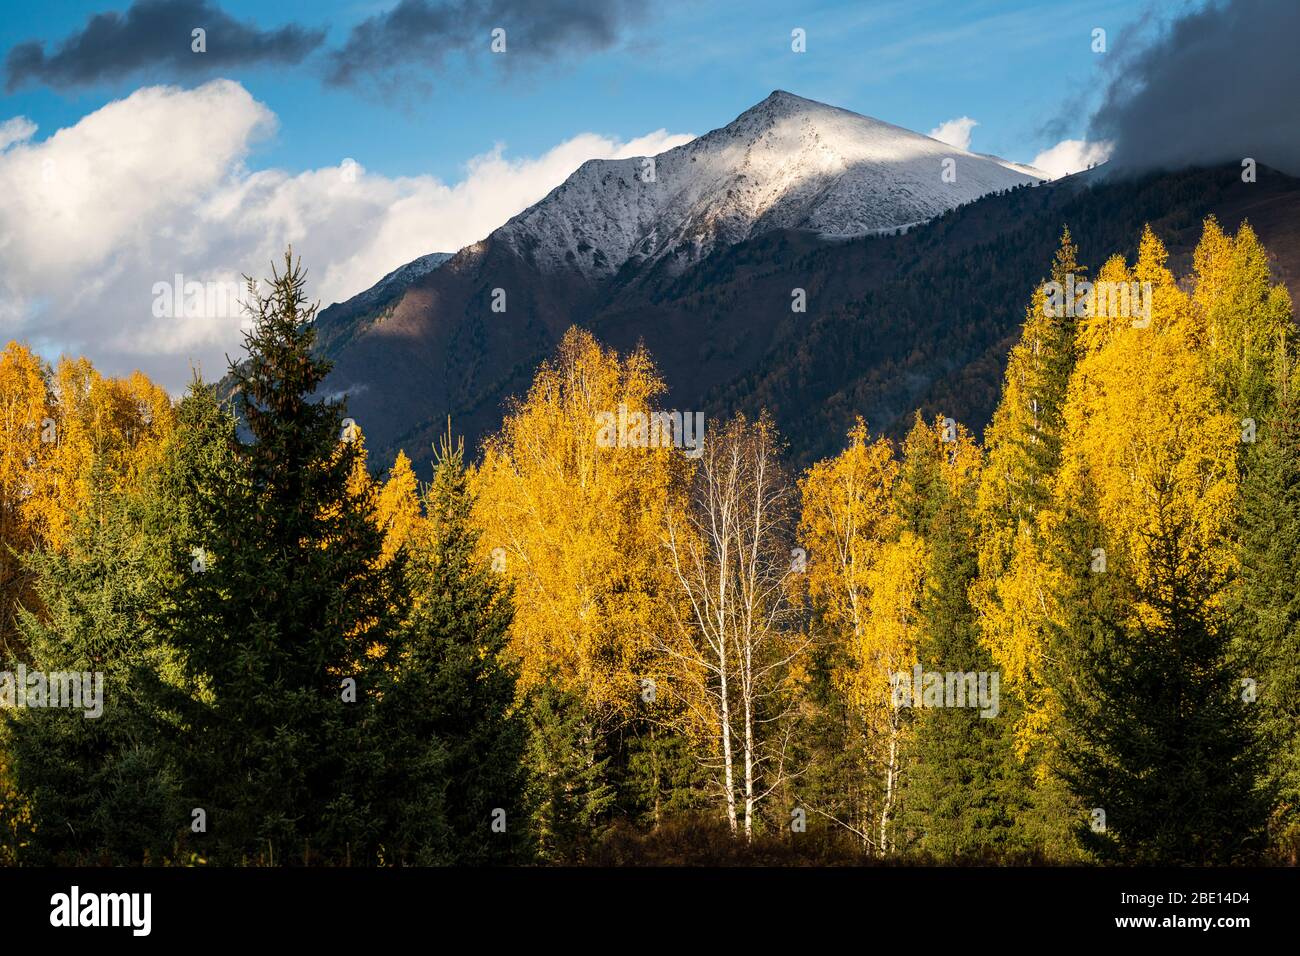 Colorful autumn foliage in the snowcapped Altay mountain of Xinjiang, China Stock Photo